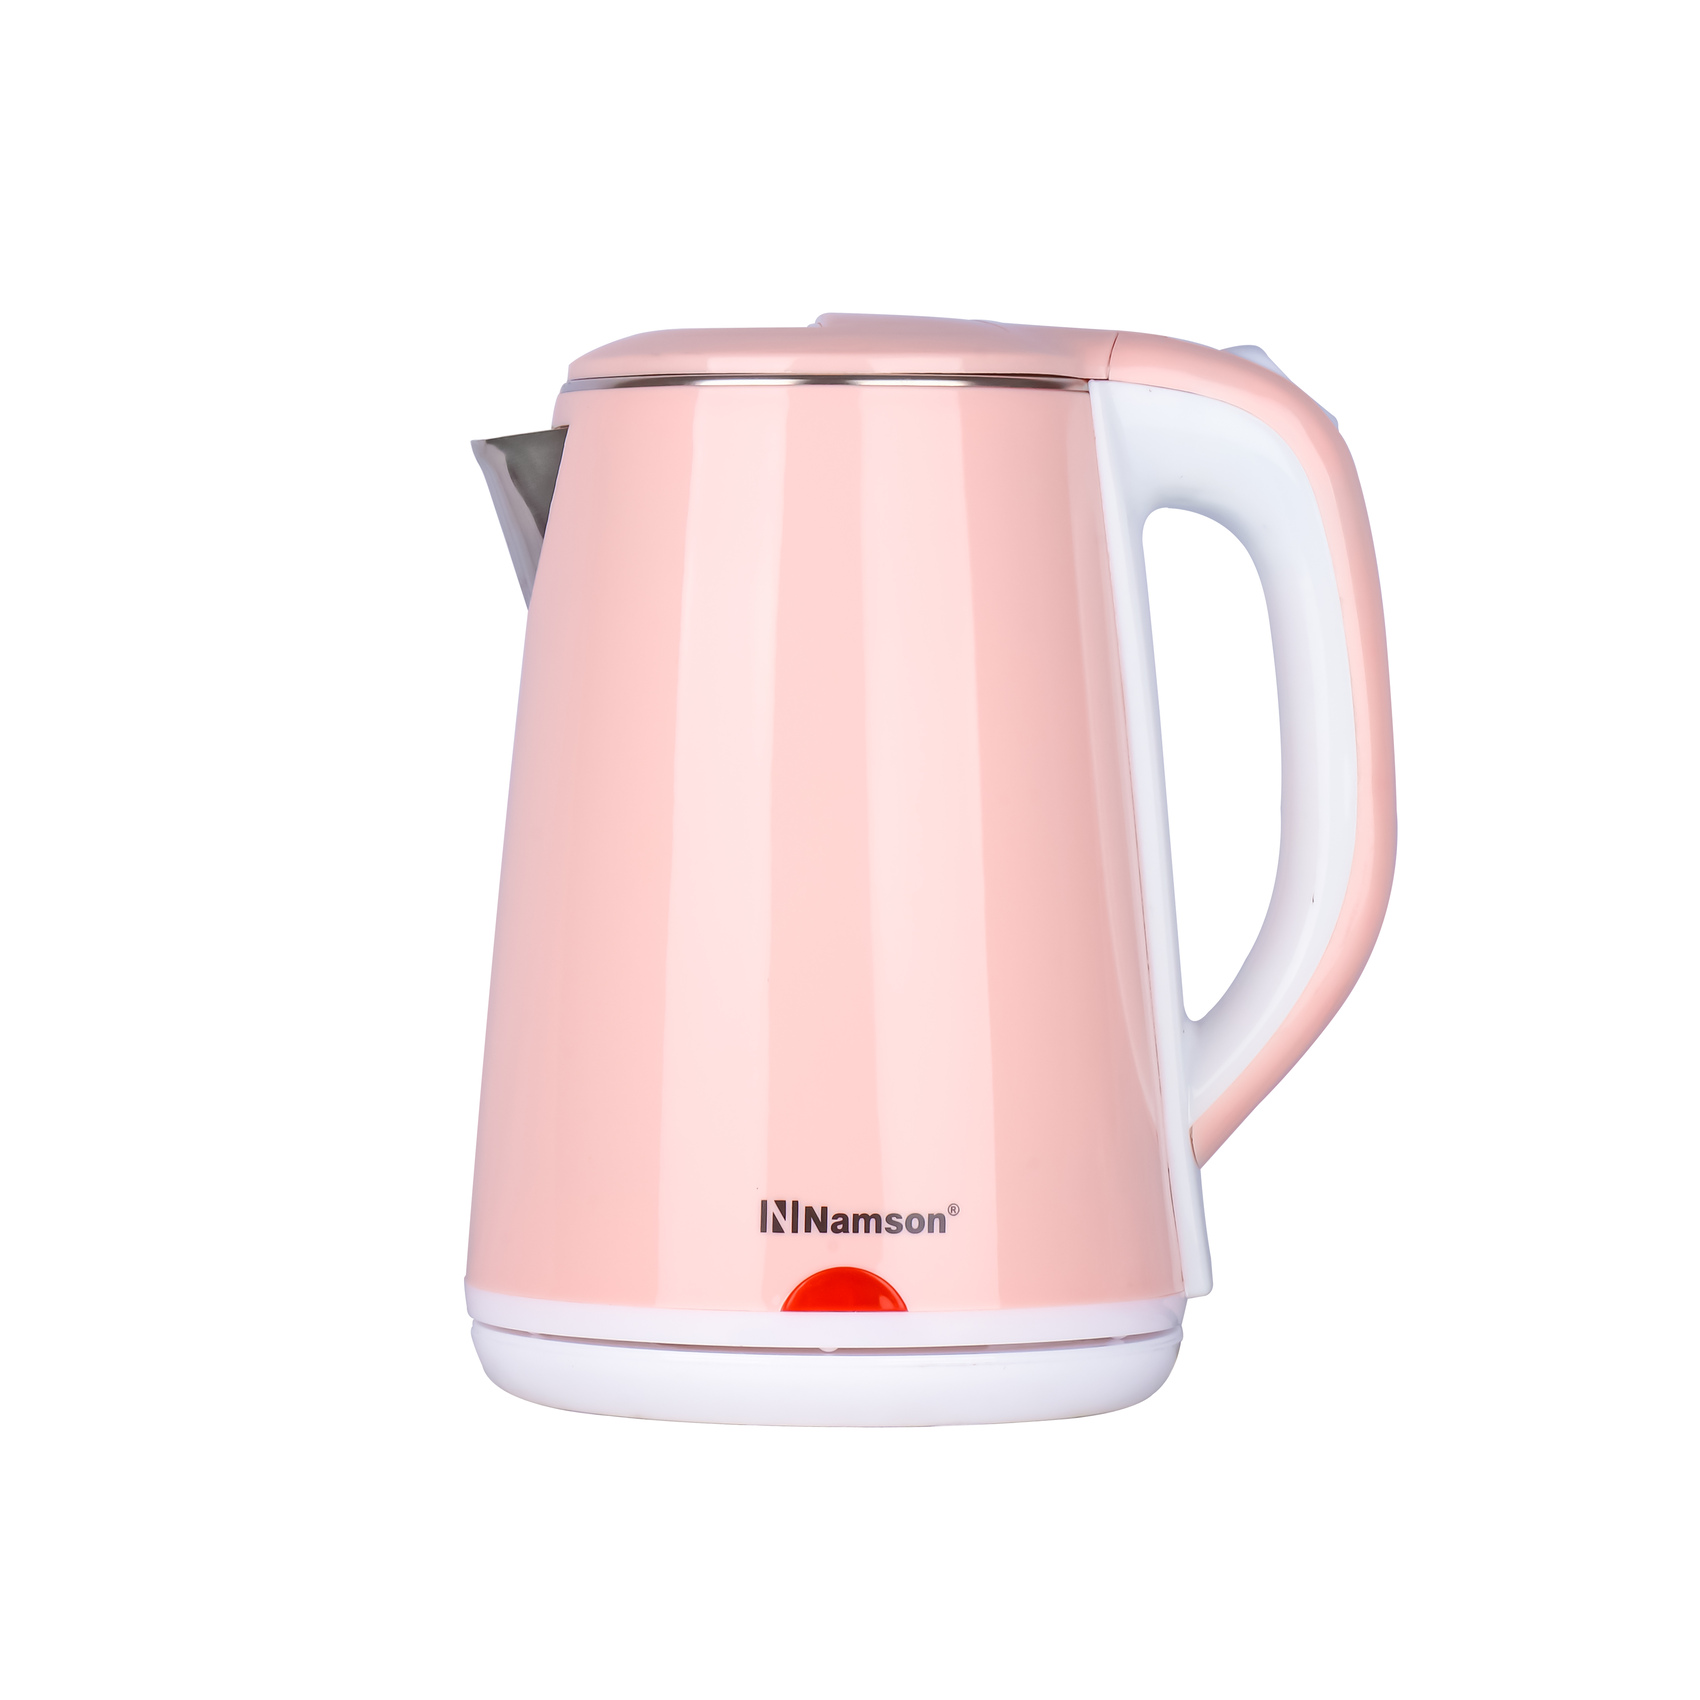 NAMSON ELECTRIC KETTLE 2200W 1.8L | RAPID BOIL SYSTEM | STAINLESS STEEL BODY |OVER HEAT PROTECTION | RAPID BOIL SYSTEM | BS PLUG | STAINLESS STEEL | 360 ROTATIVE BASE | POWER CORD STORAGE | NA-7787